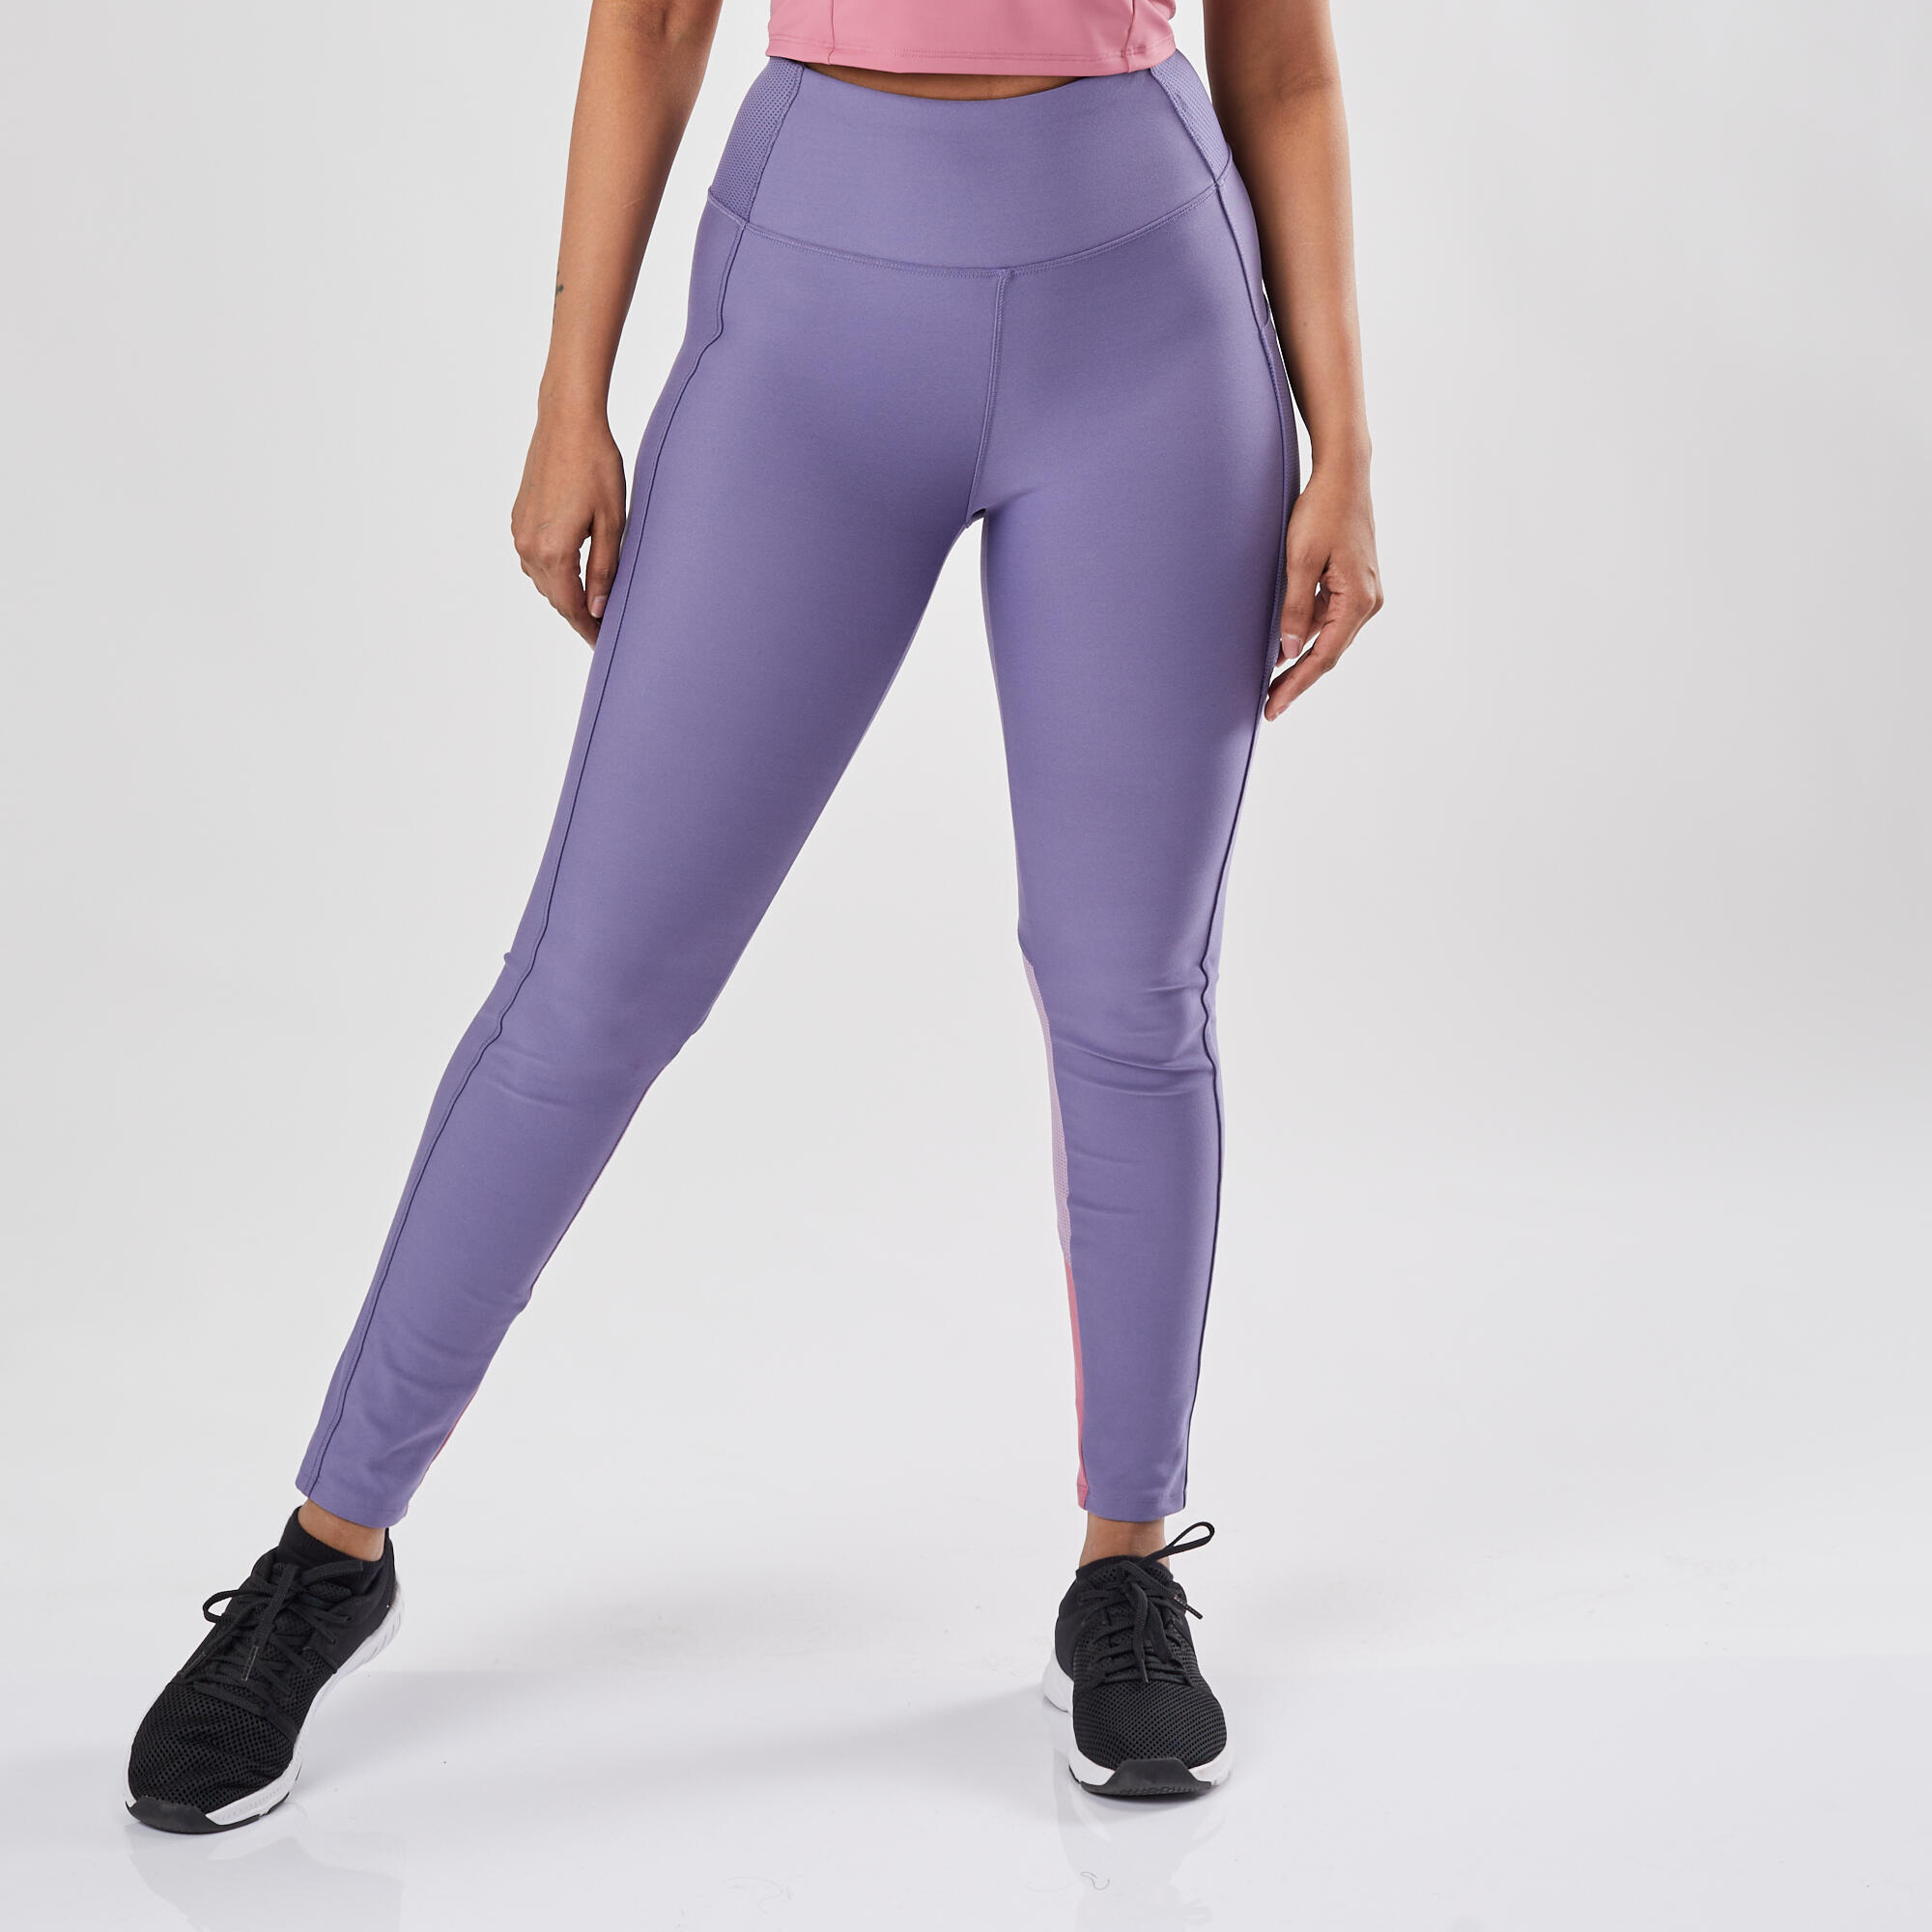 TechFit Leggings with Transparent Mesh and Side Pockets in Pink –  fabulousathletica.com